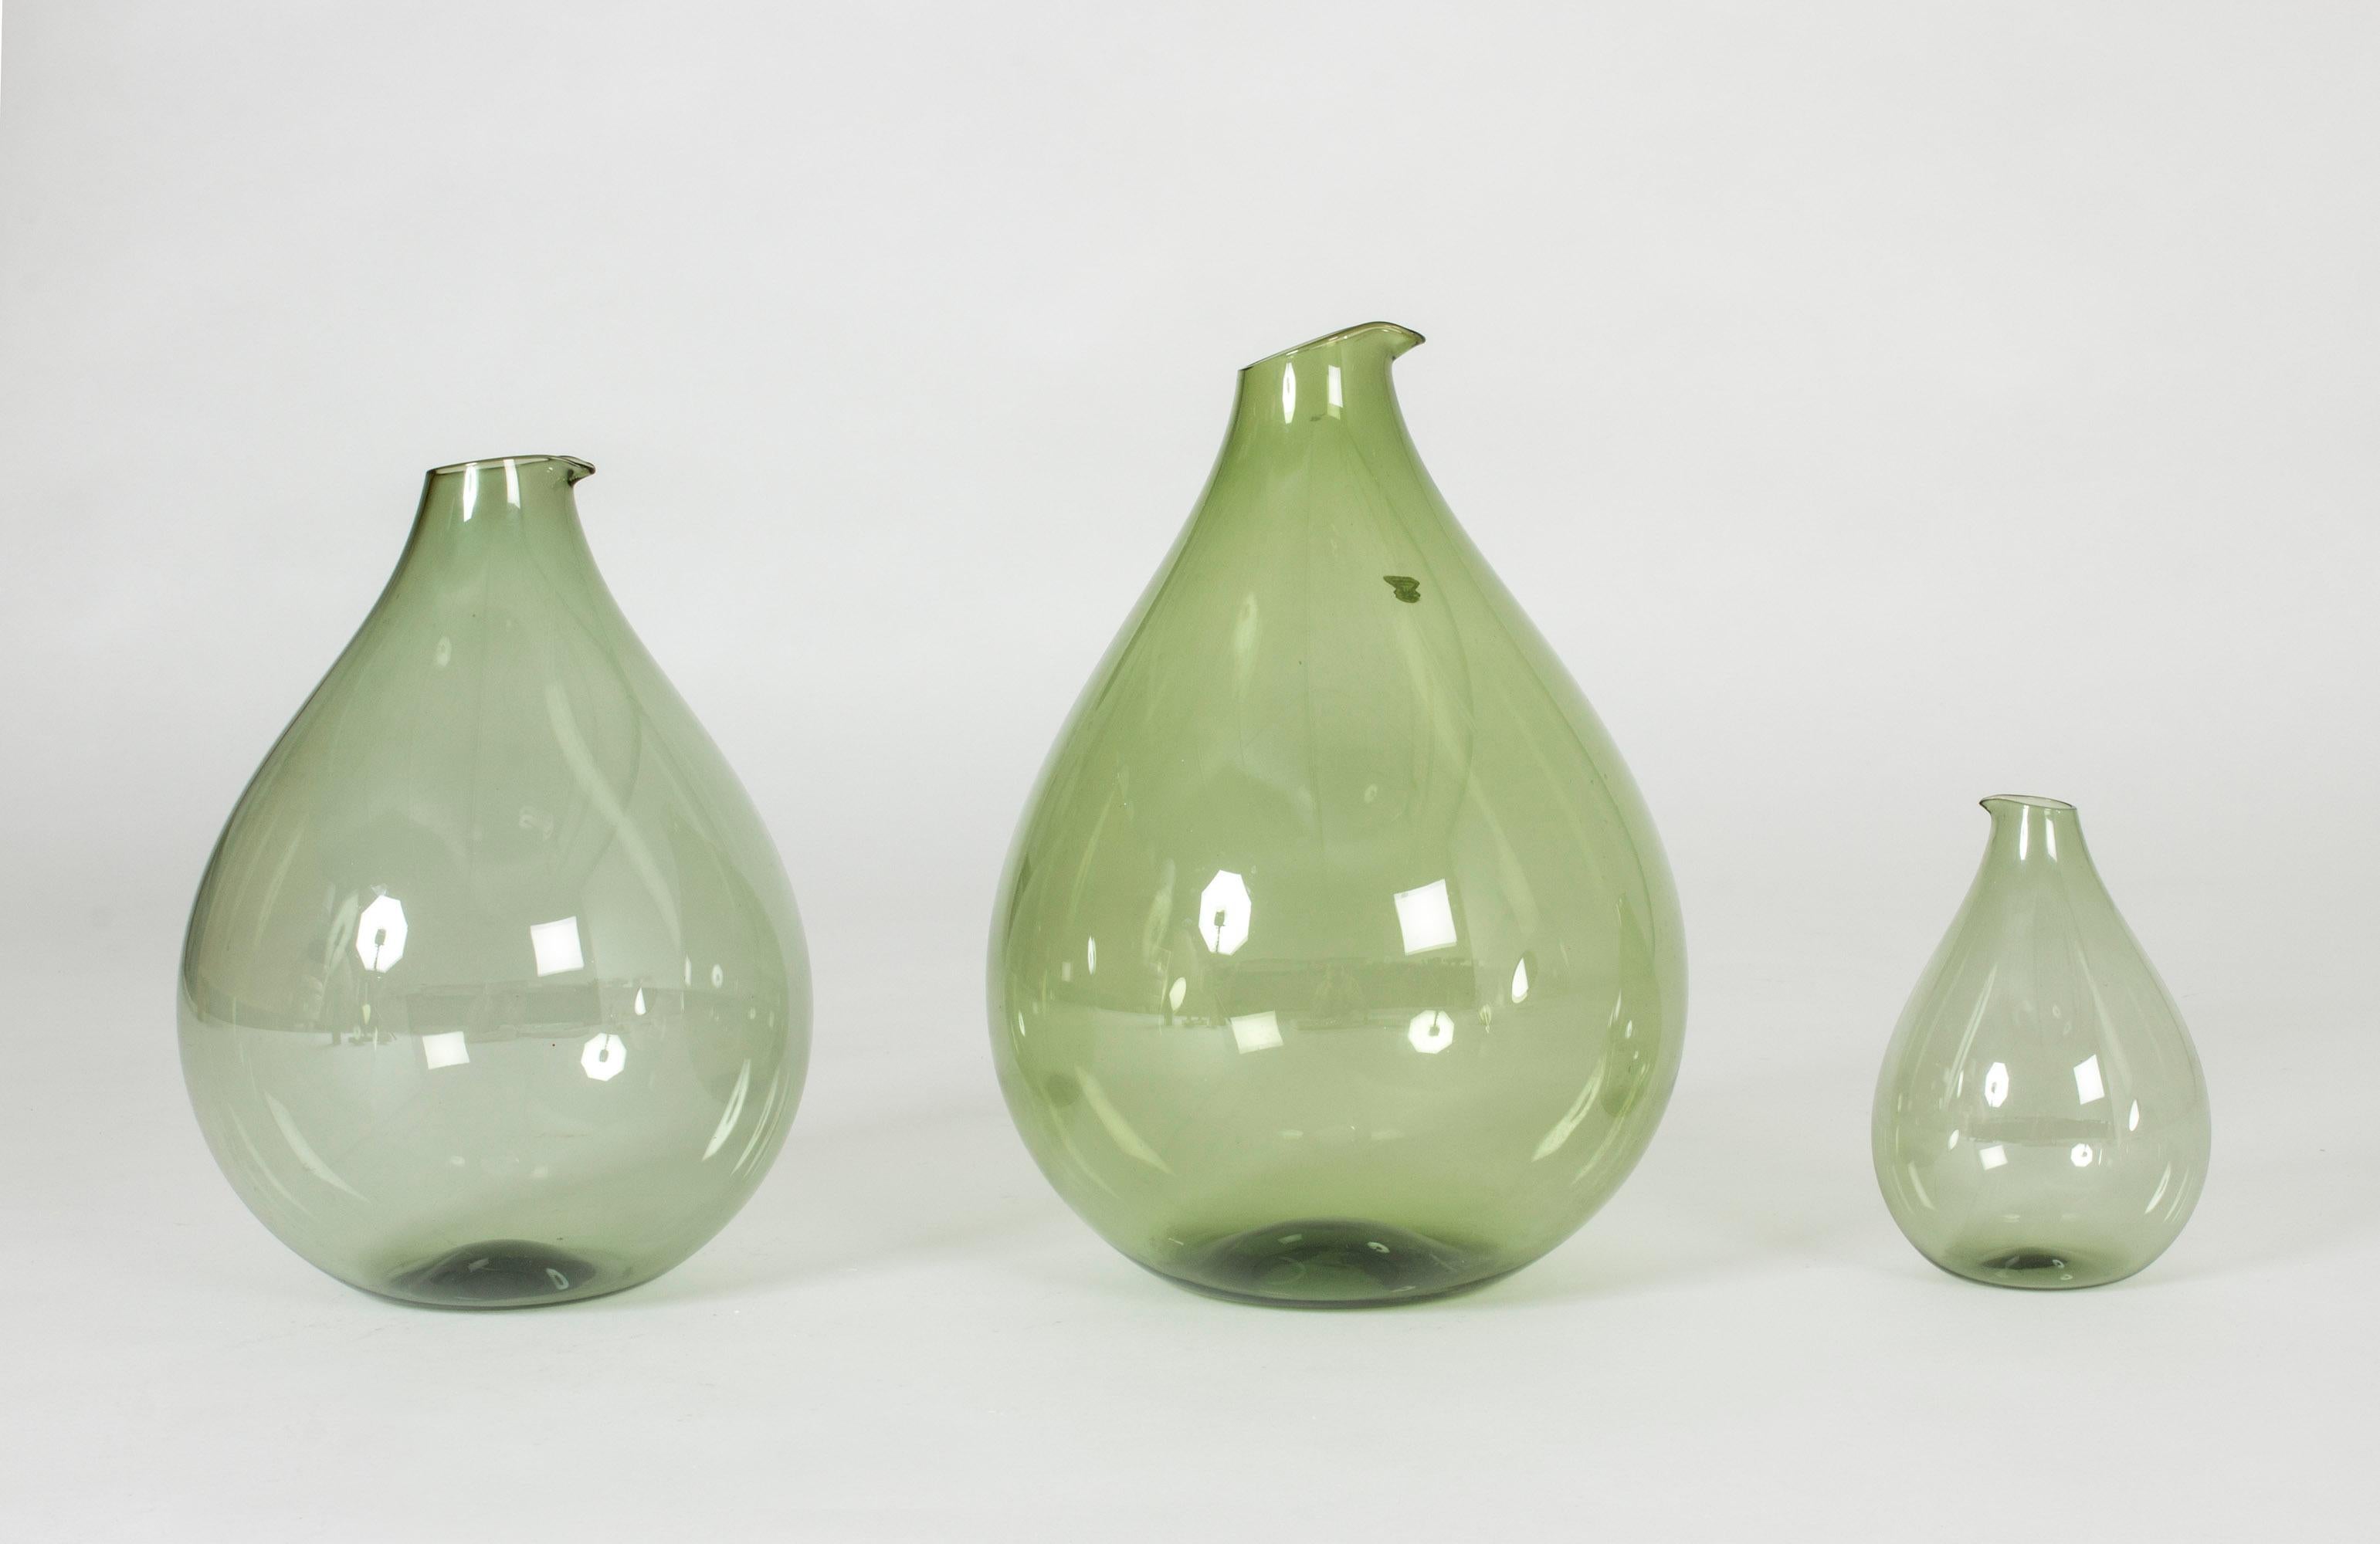 Set of three beautiful vases or decanters by Kjell Blomberg. Made in thin, green glass with a look of soap bubble delicacy, in generous drop shapes.

The dimensions of each vase are as follows:
Heights 36, 32, 18 cm
Diameters 27, 23, 13 cm.